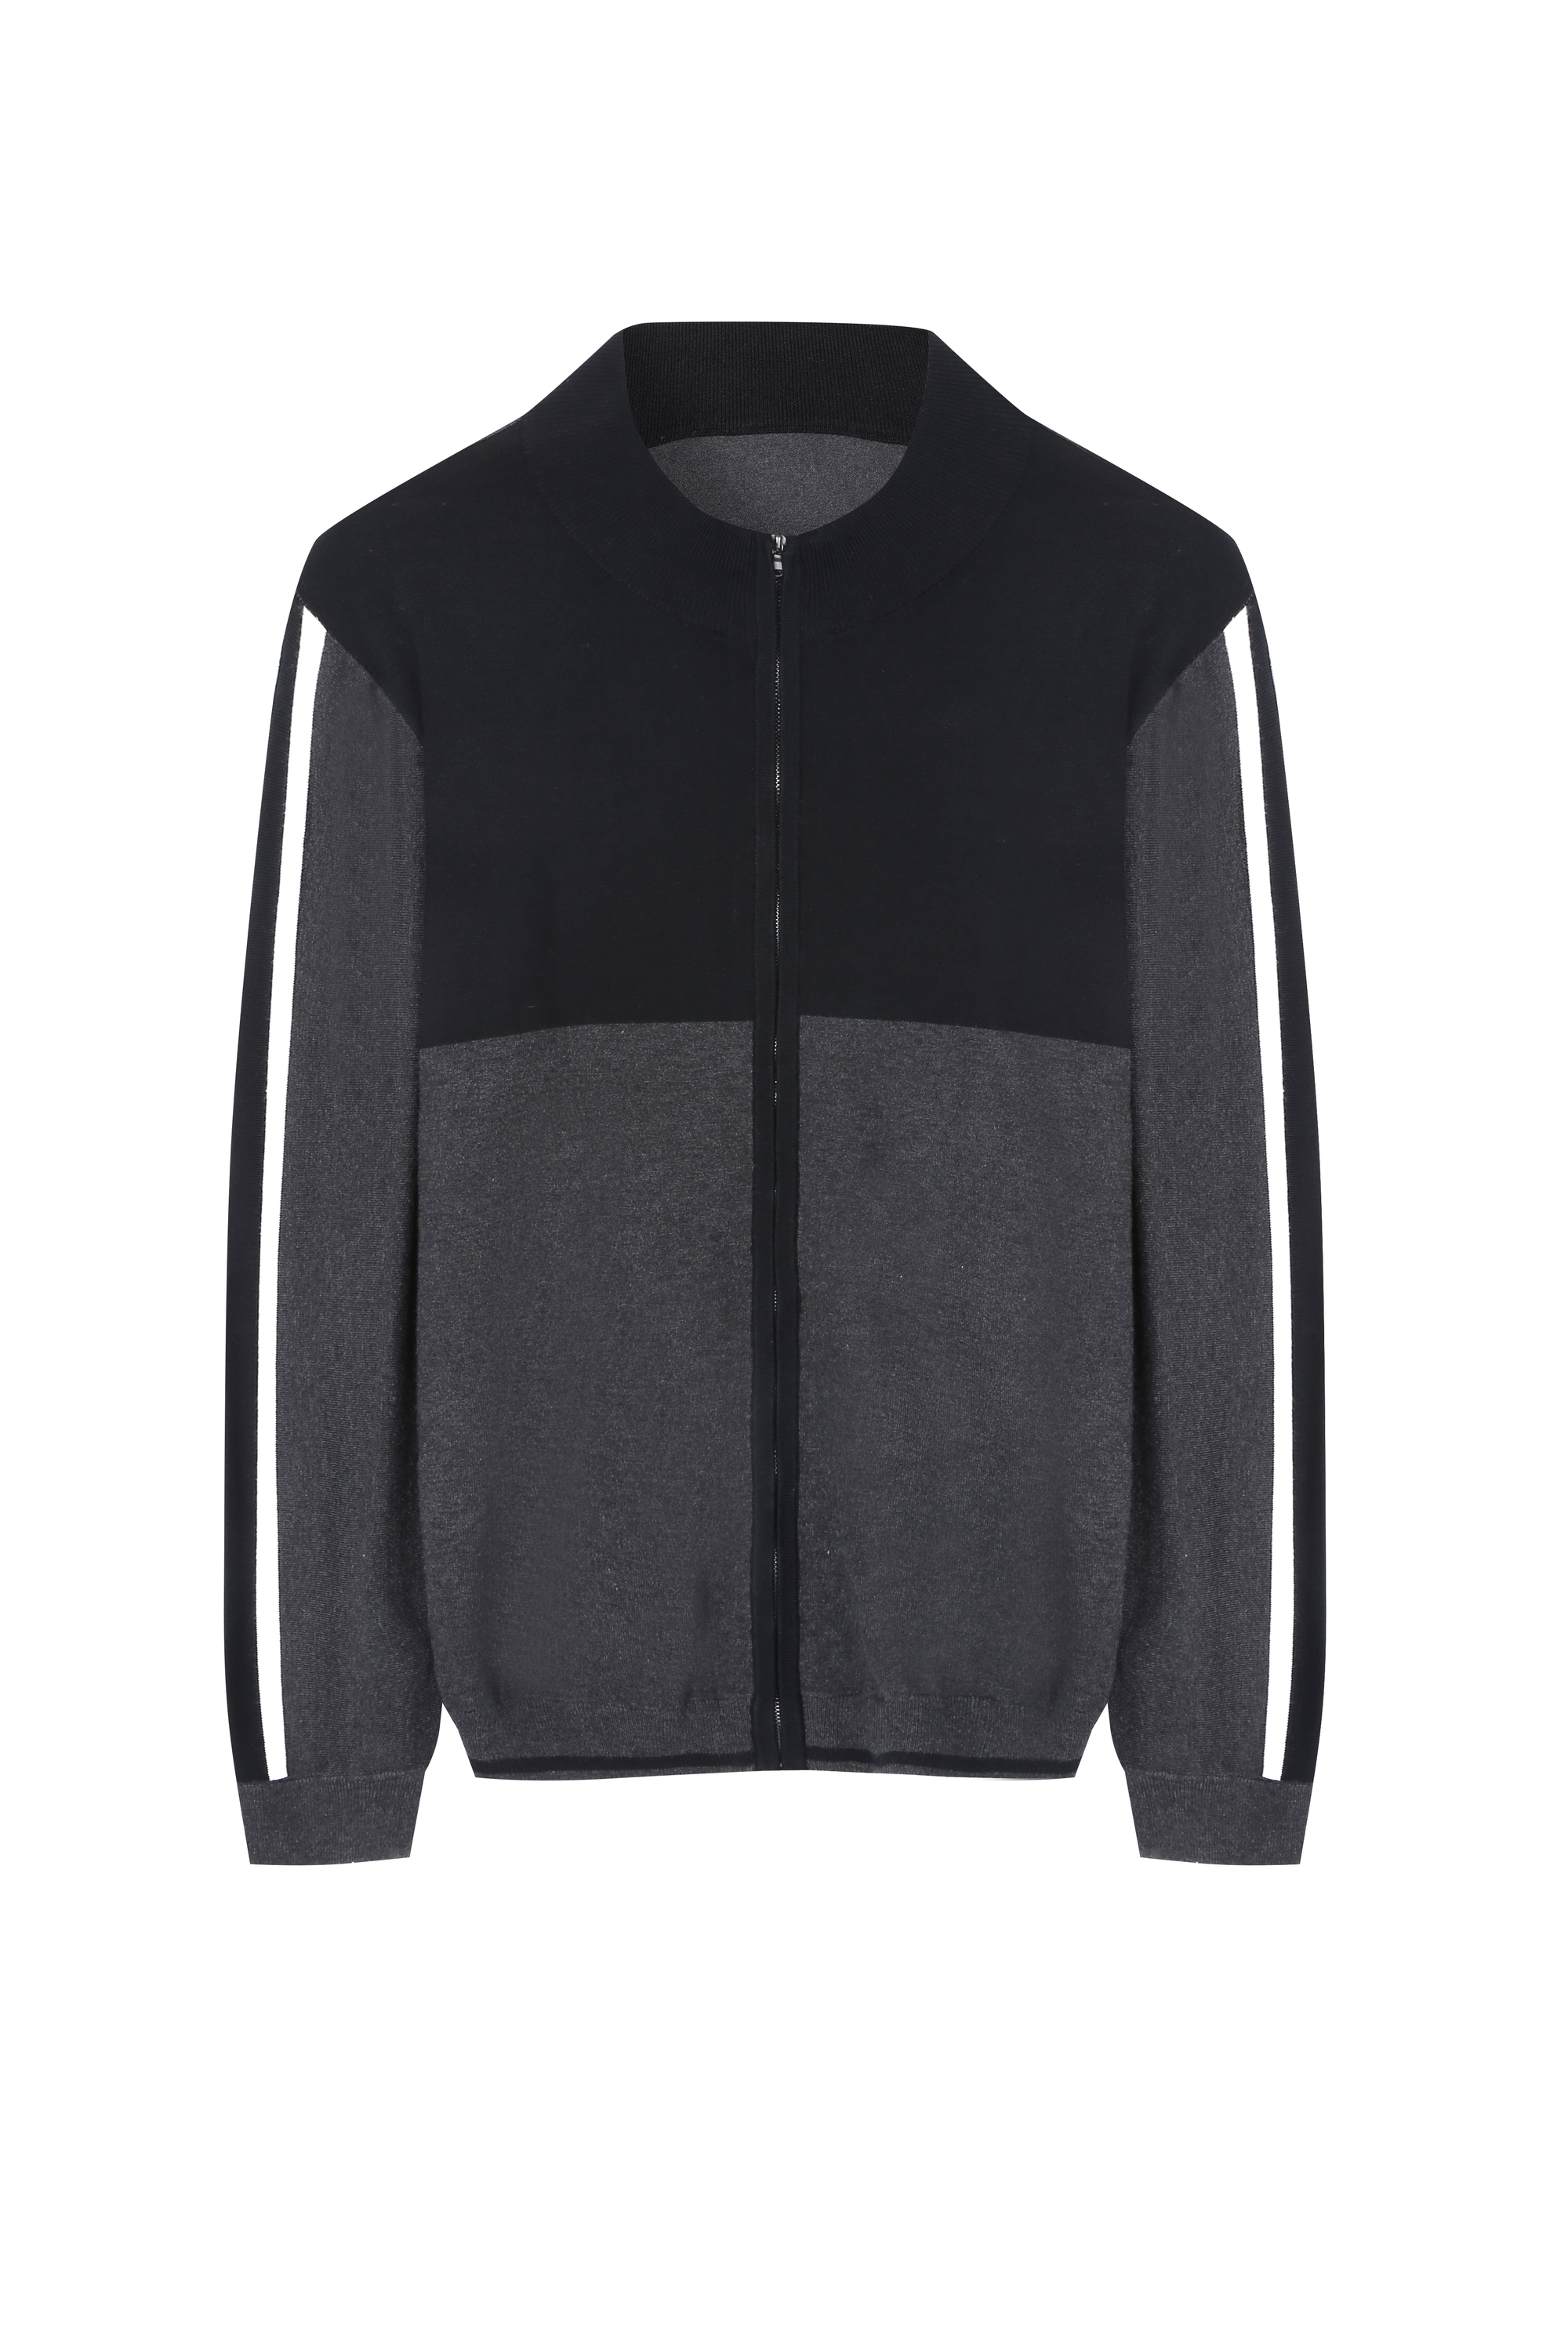 Men's Super Soft full Zip Knitted Cardigan in Sport Style